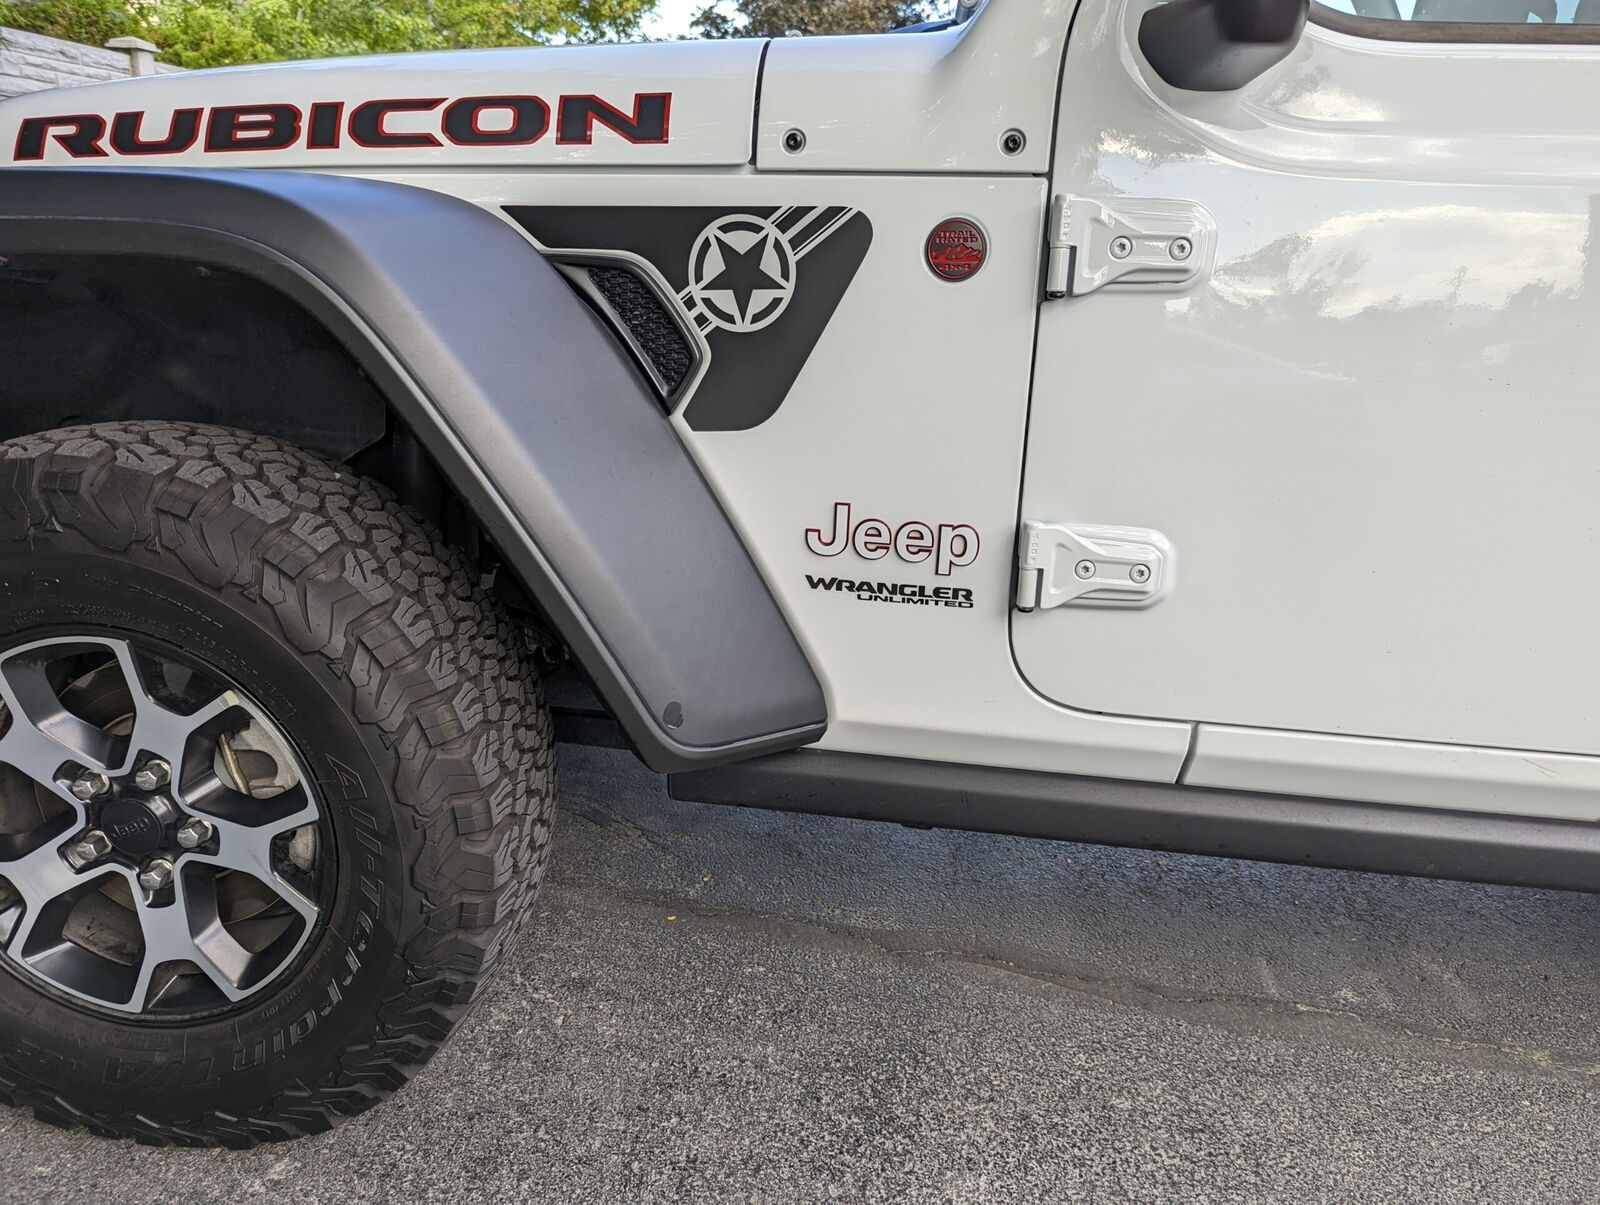 White Jeep Wrangler Rubicon with star decal